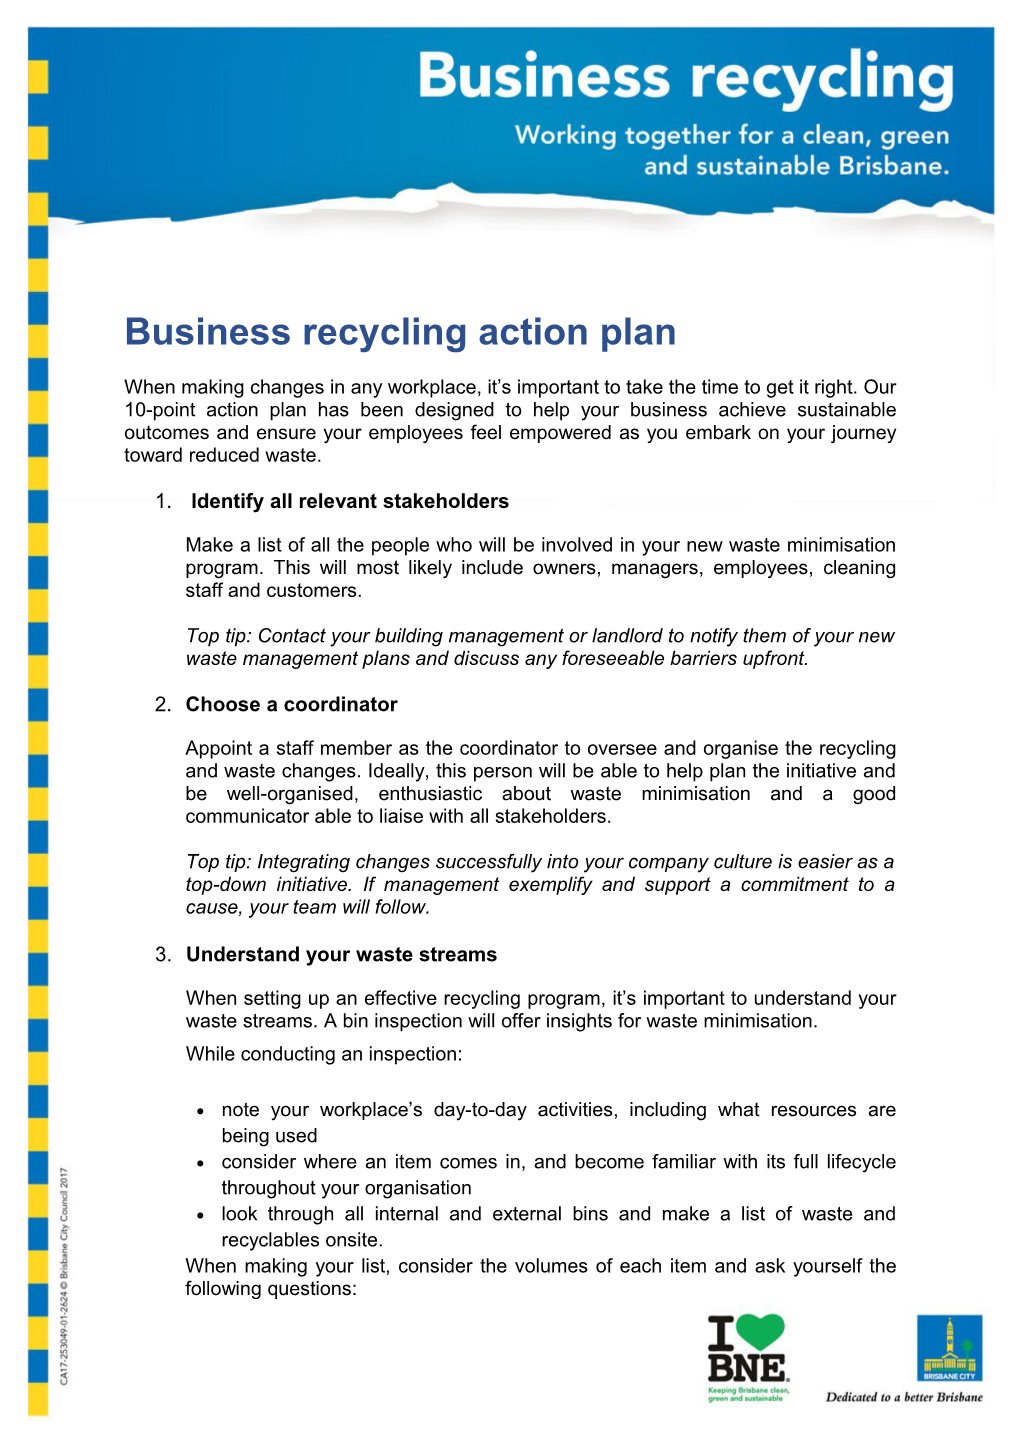 Business Recycling Action Plan